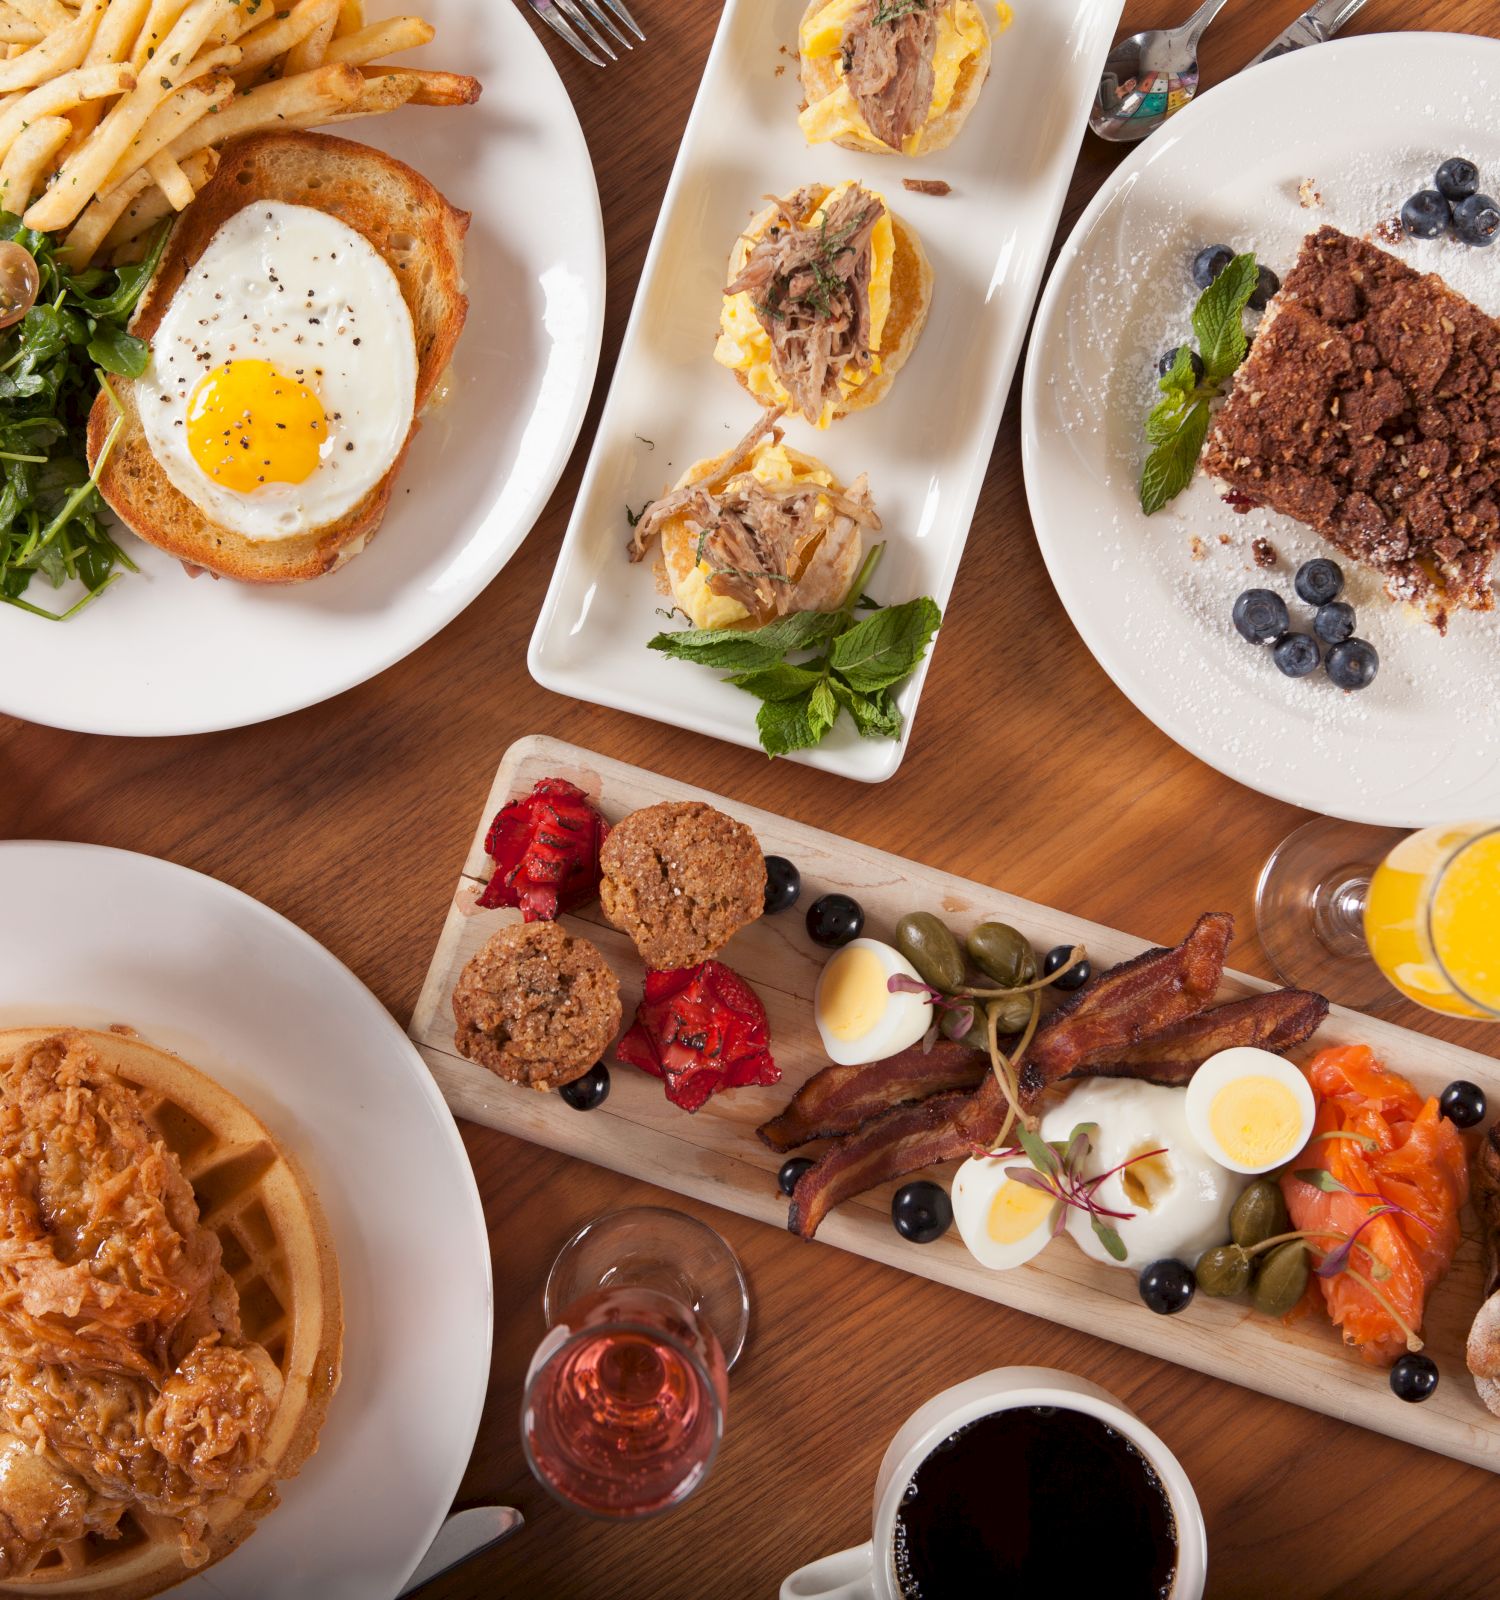 The image shows a variety of breakfast dishes on a wooden table, including waffles, salad with egg, pastries, fruit, drinks, and other assorted items.